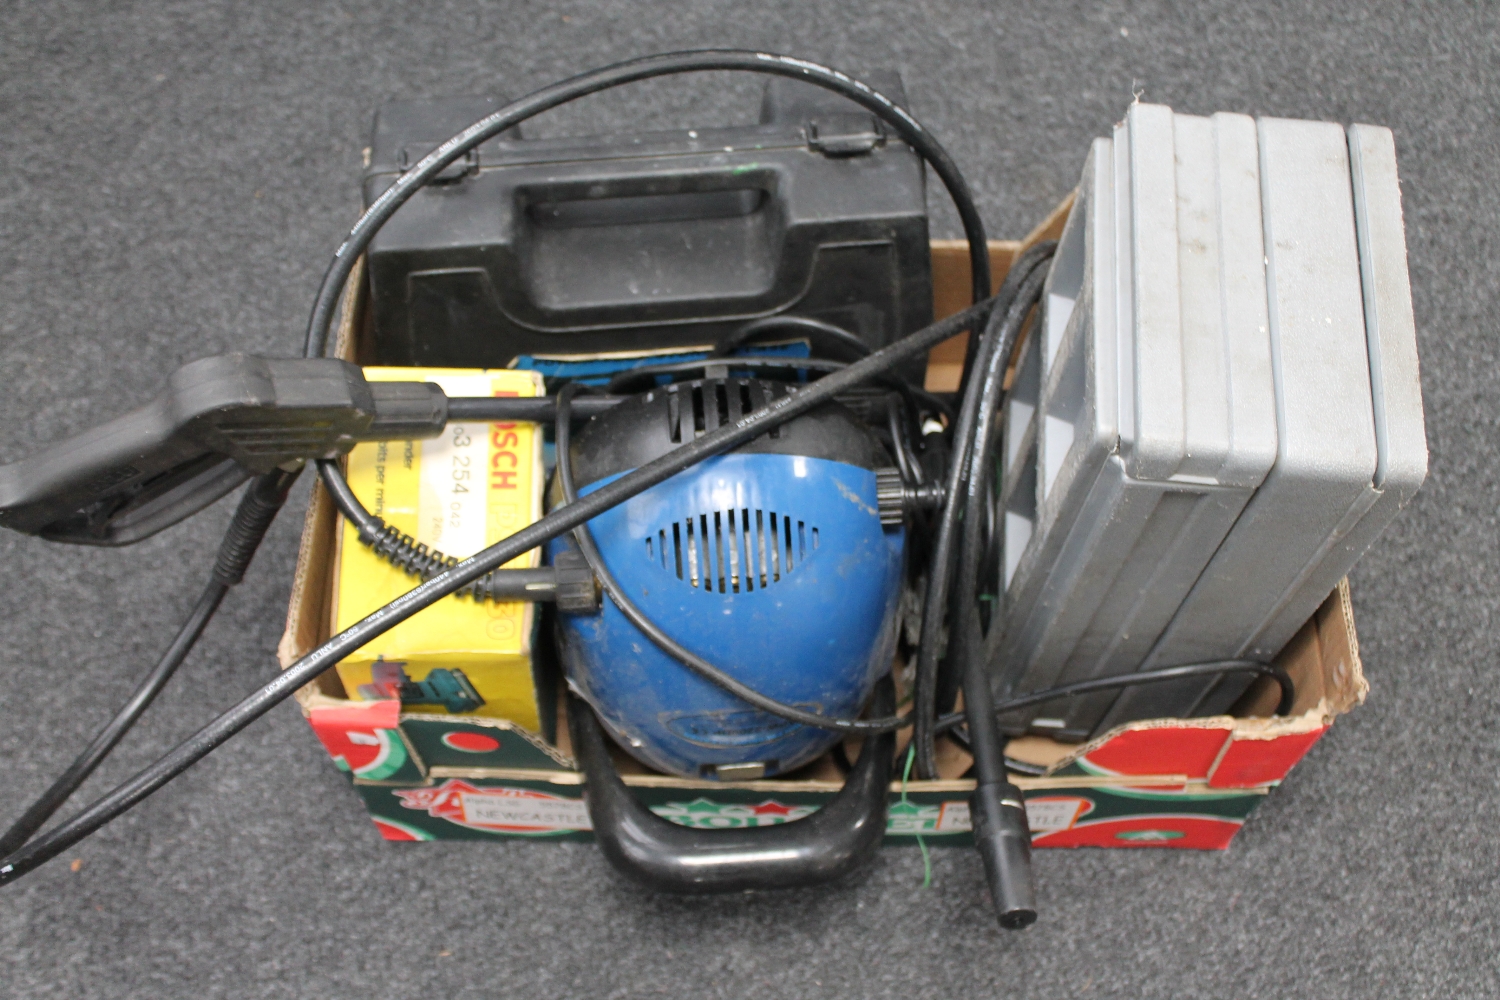 A box of pressure washer, tool box and tools,